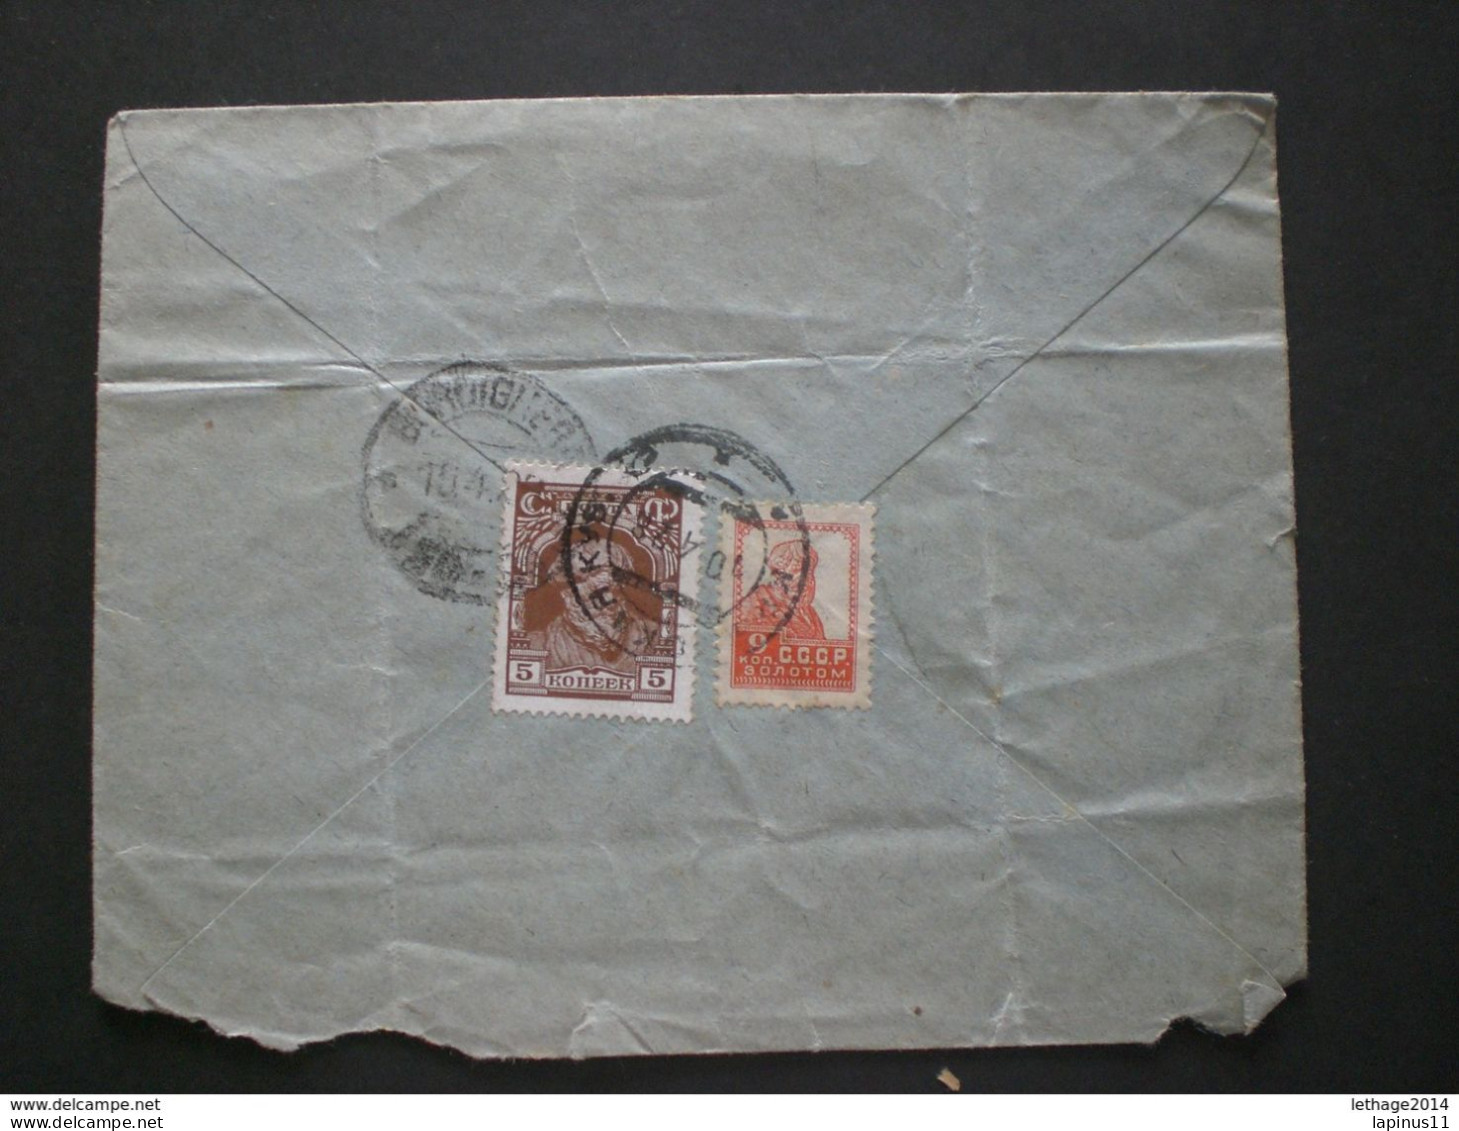 RUSSIA RUSSIE РОССИЯ STAMPS COVER 1928 RUSSLAND TO ITALY RRR RIF. TAGG (175) - Cartas & Documentos